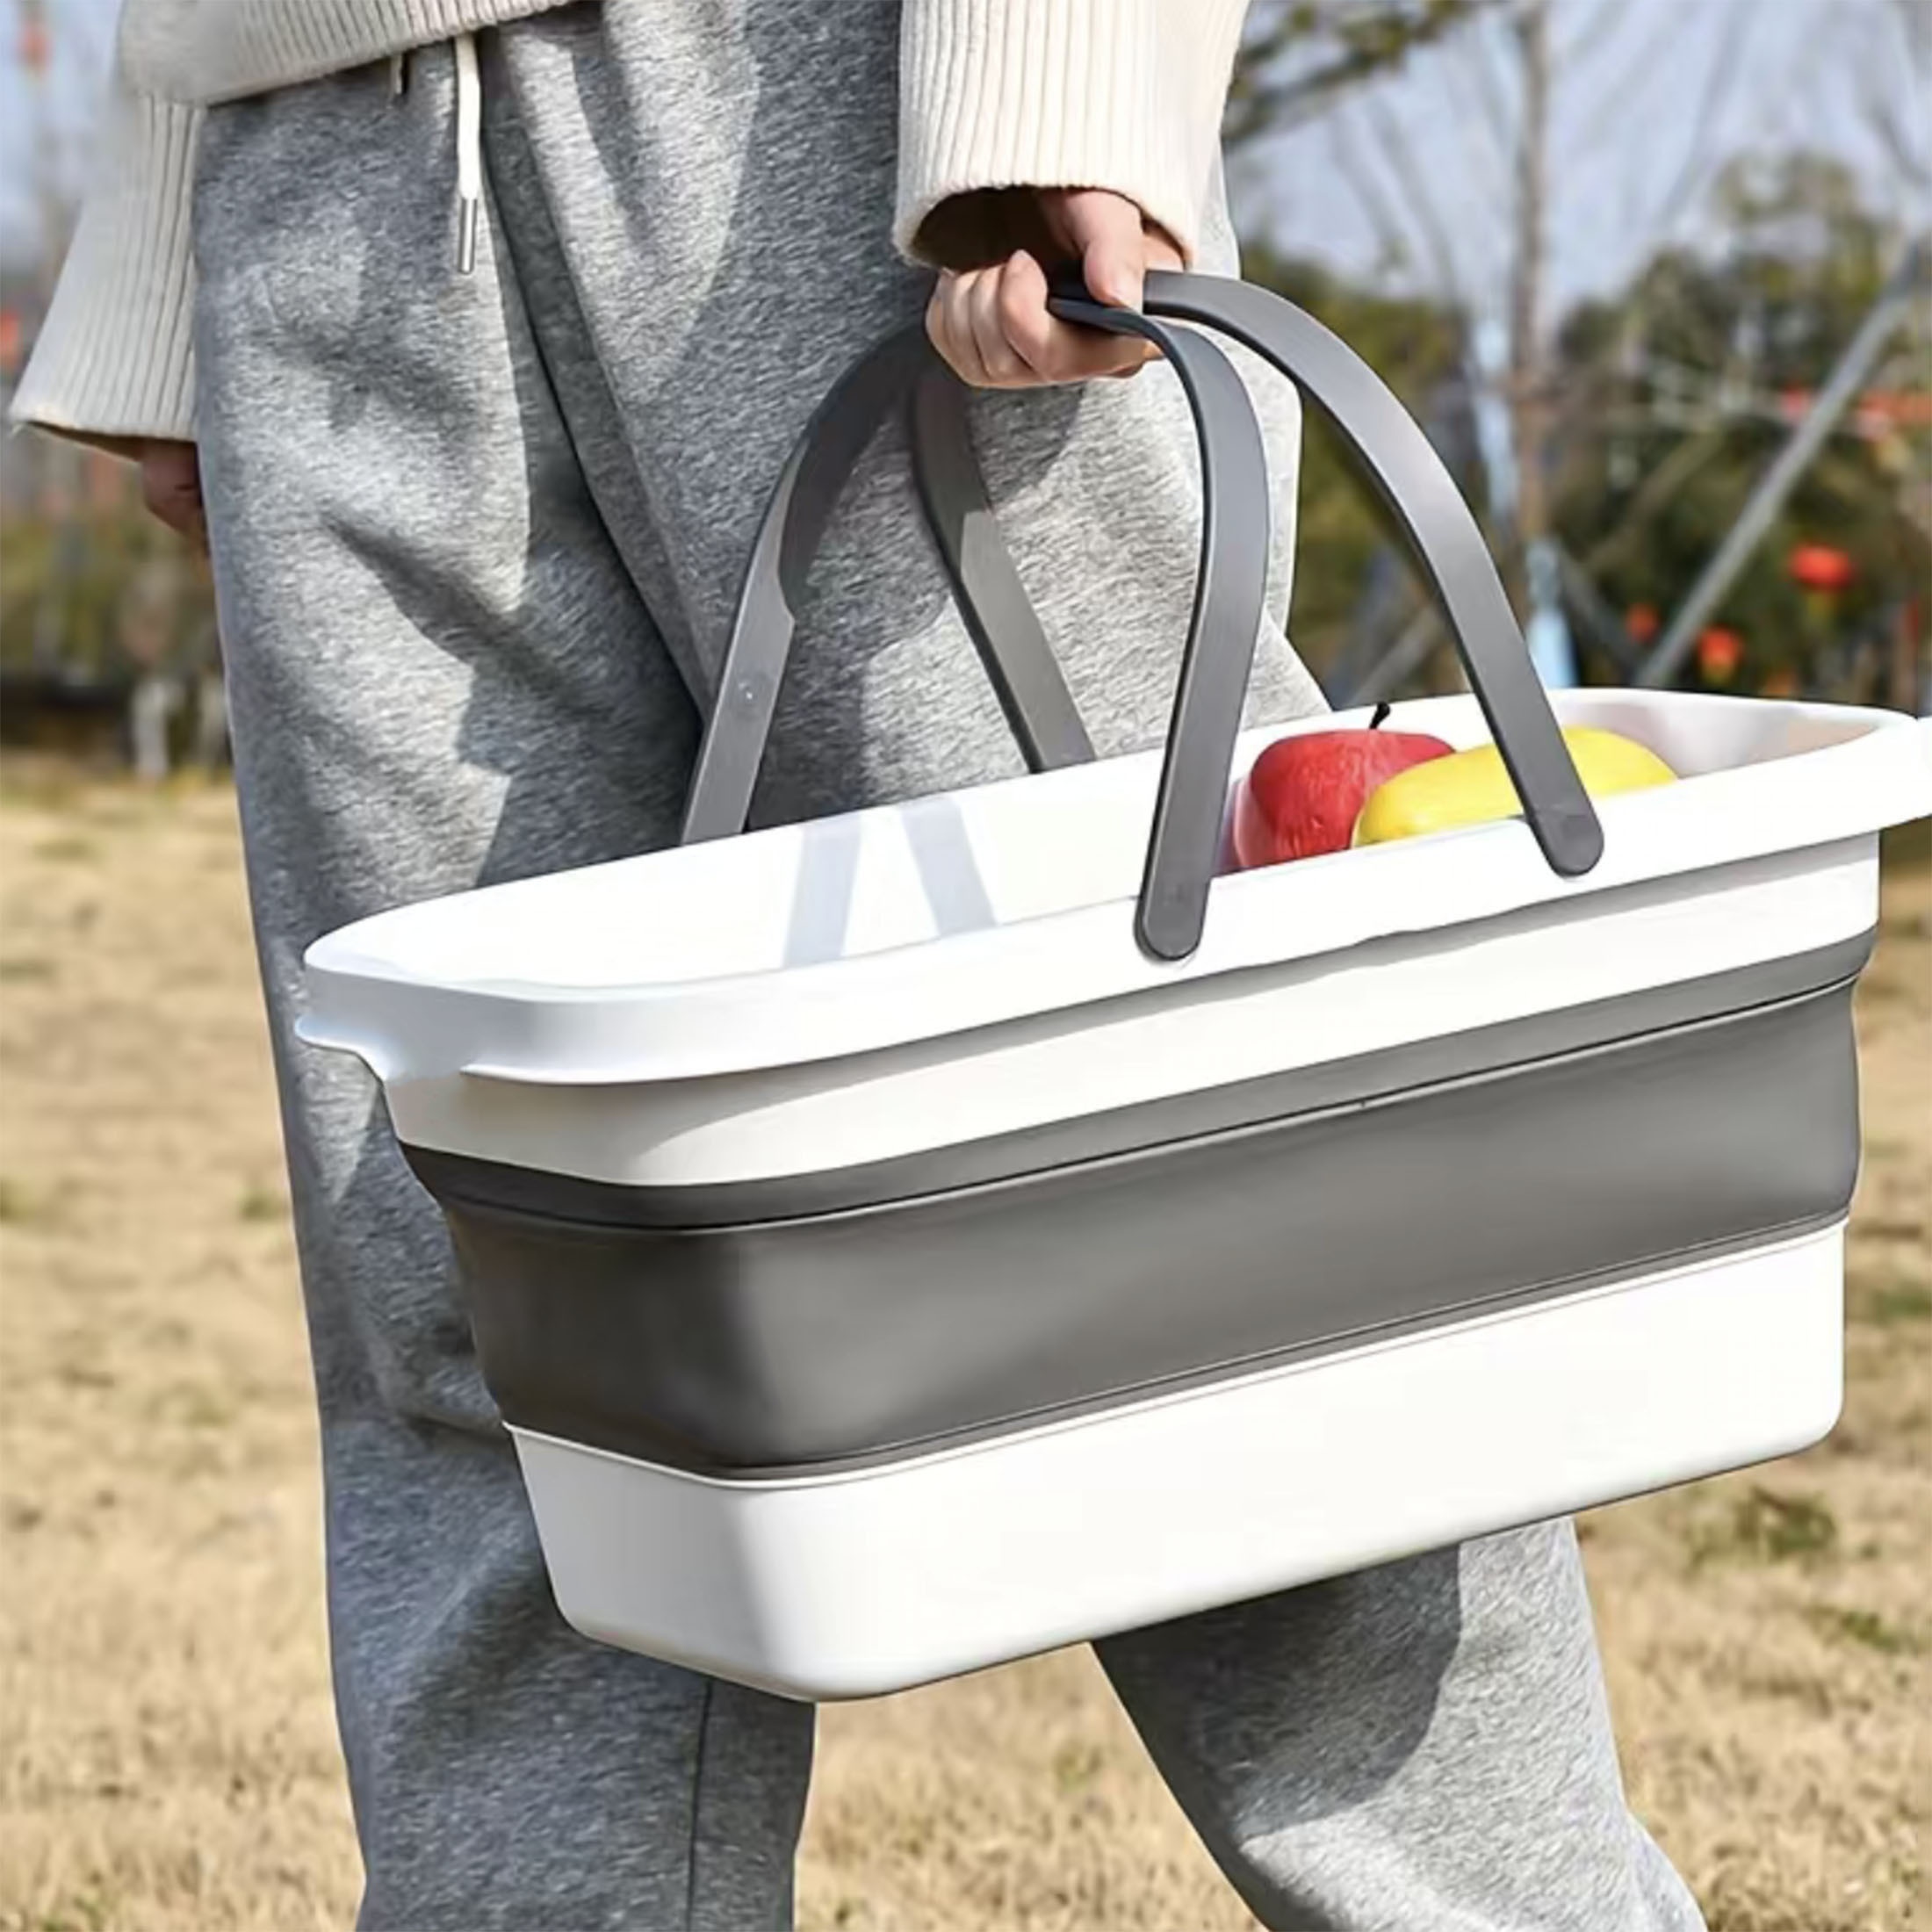 1pc Large Collapsible Mop Bucket with handle for House Cleaning